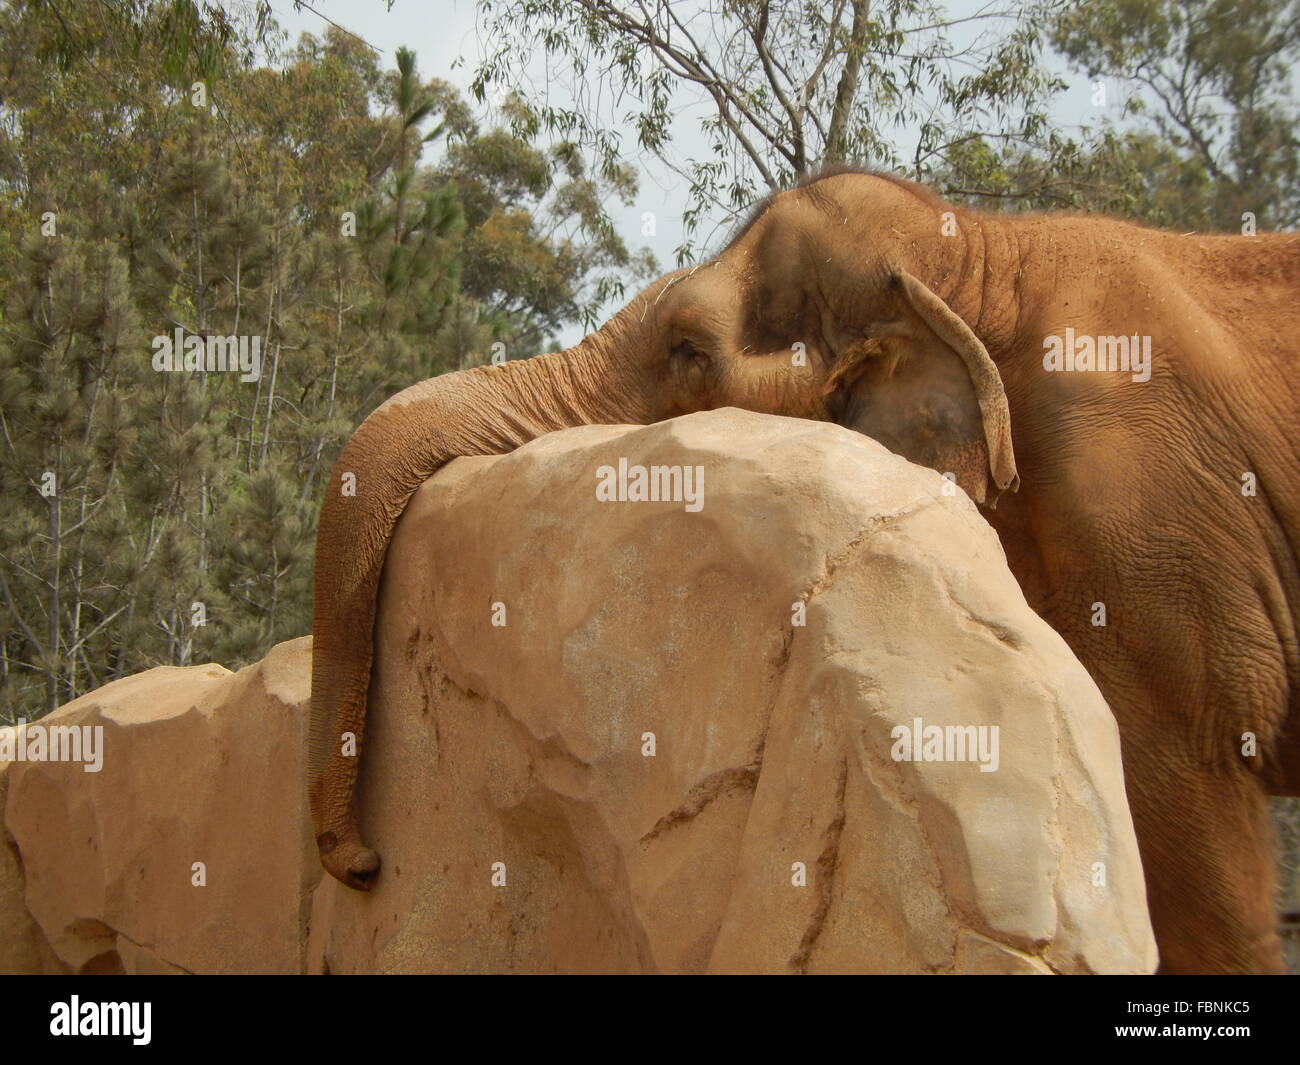 Trunk Of Elephant On Rock In Forest Stock Photo